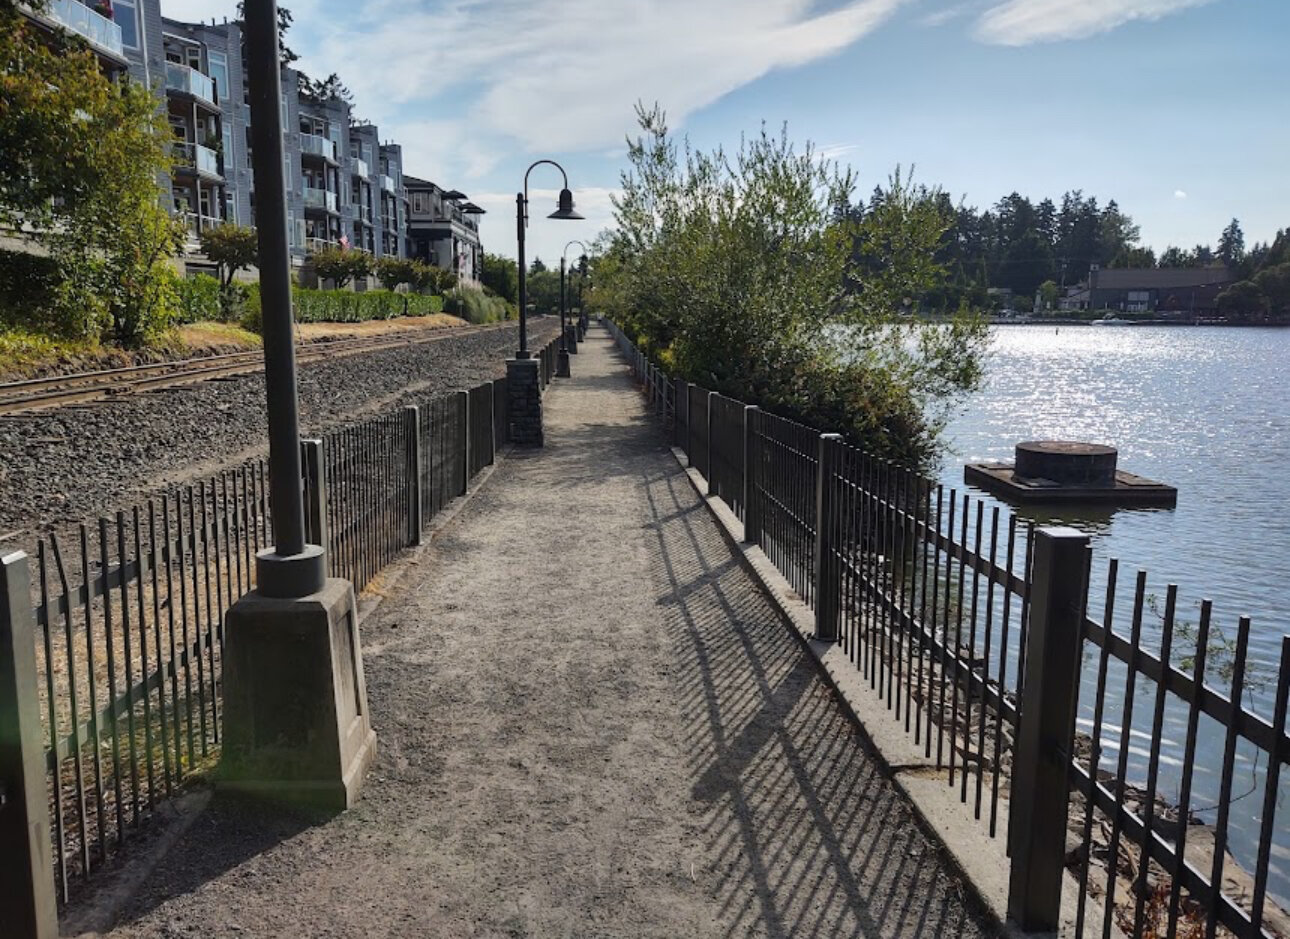 Whether you're a beginner or a seasoned adventurer, the greater Lake Oswego area offers a trail suited just for you.

Visit our website under EXPLORE MORE to for some of our favorite trails. Link in bio.